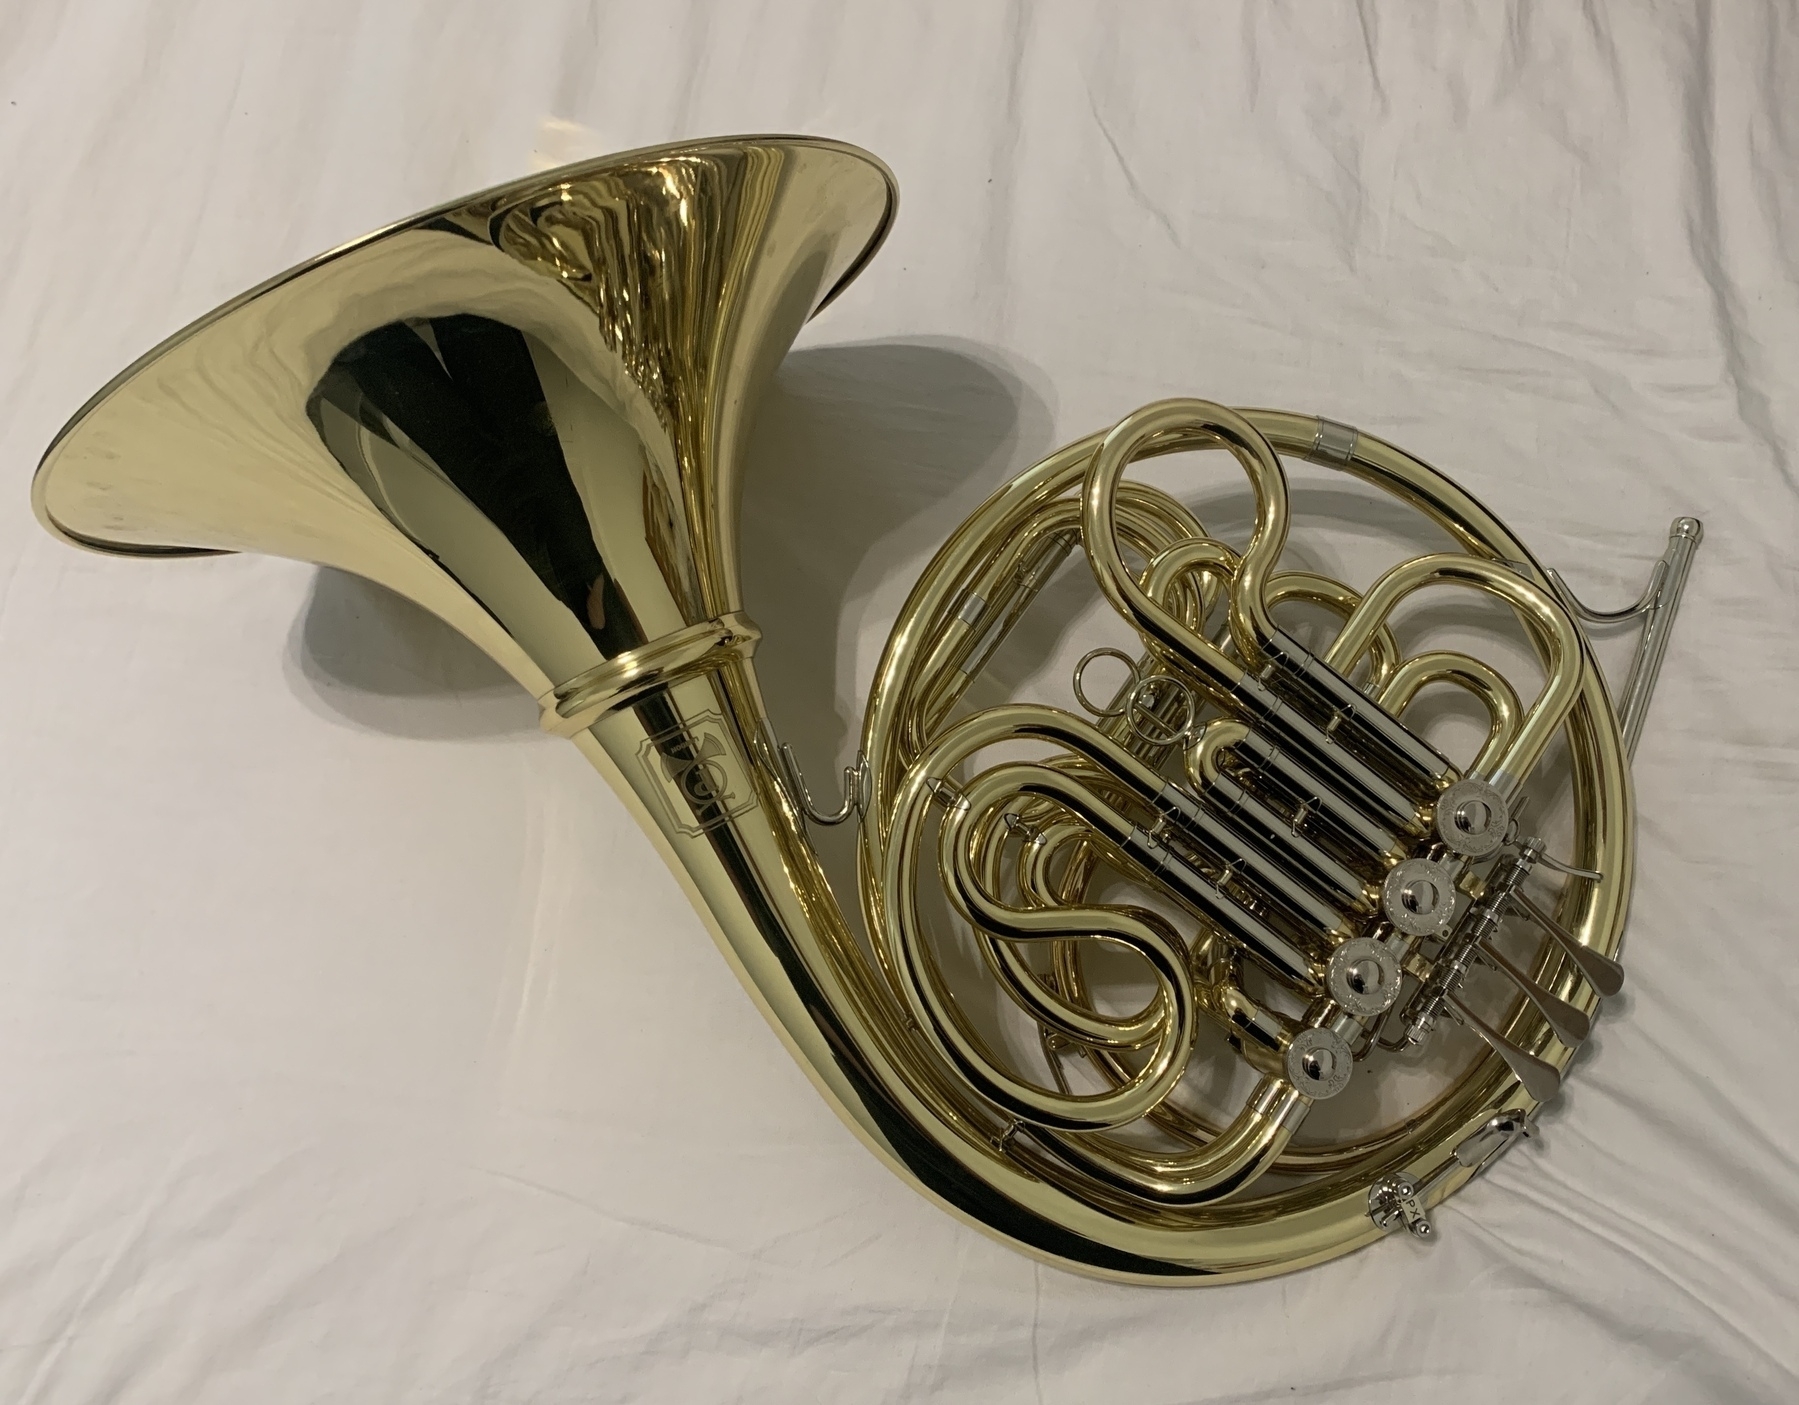 My new French horn sat on a white bed sheet